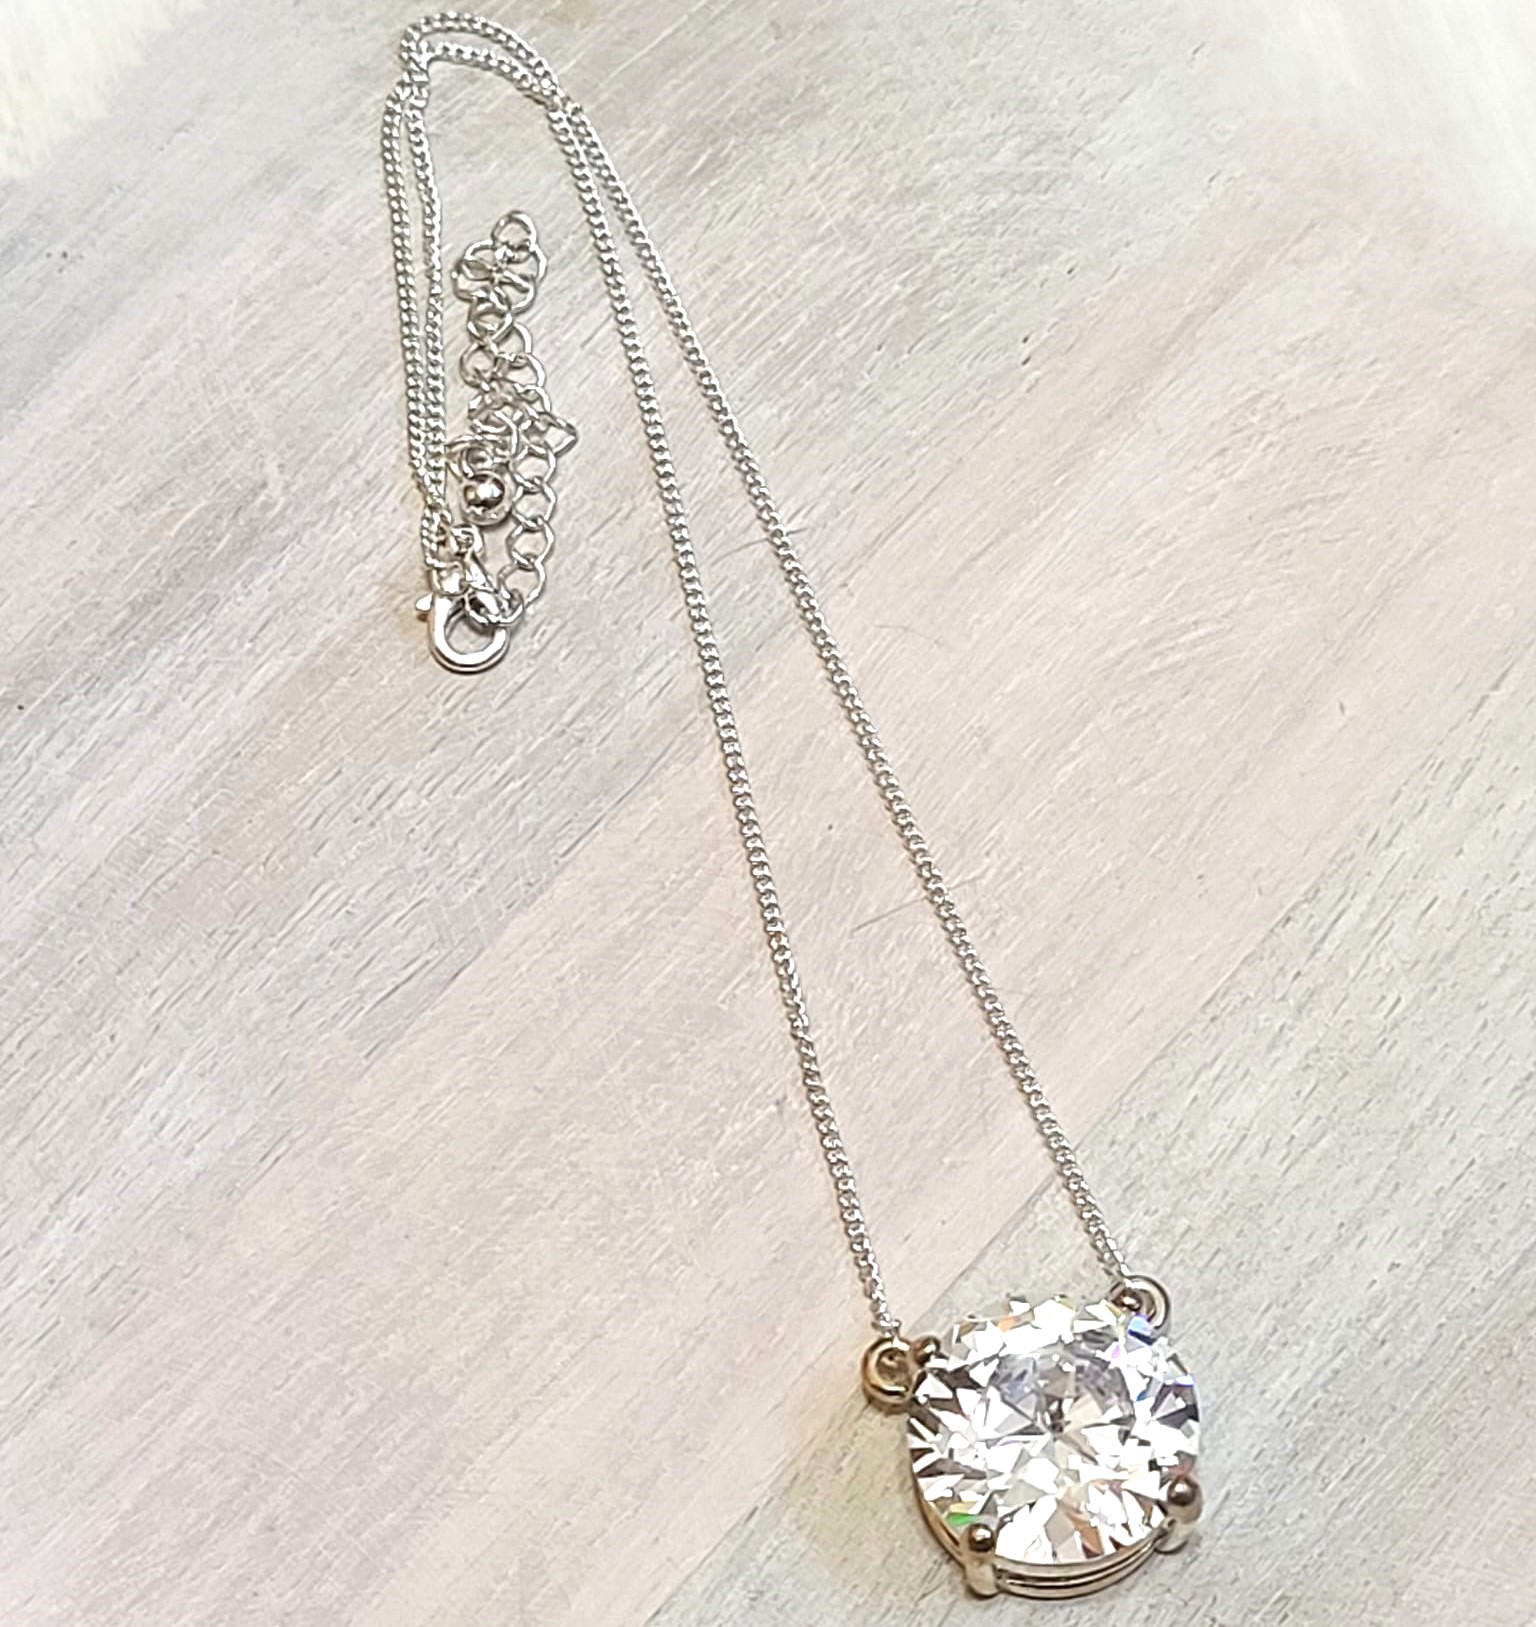 Cubic zirconia pendant necklace with chain